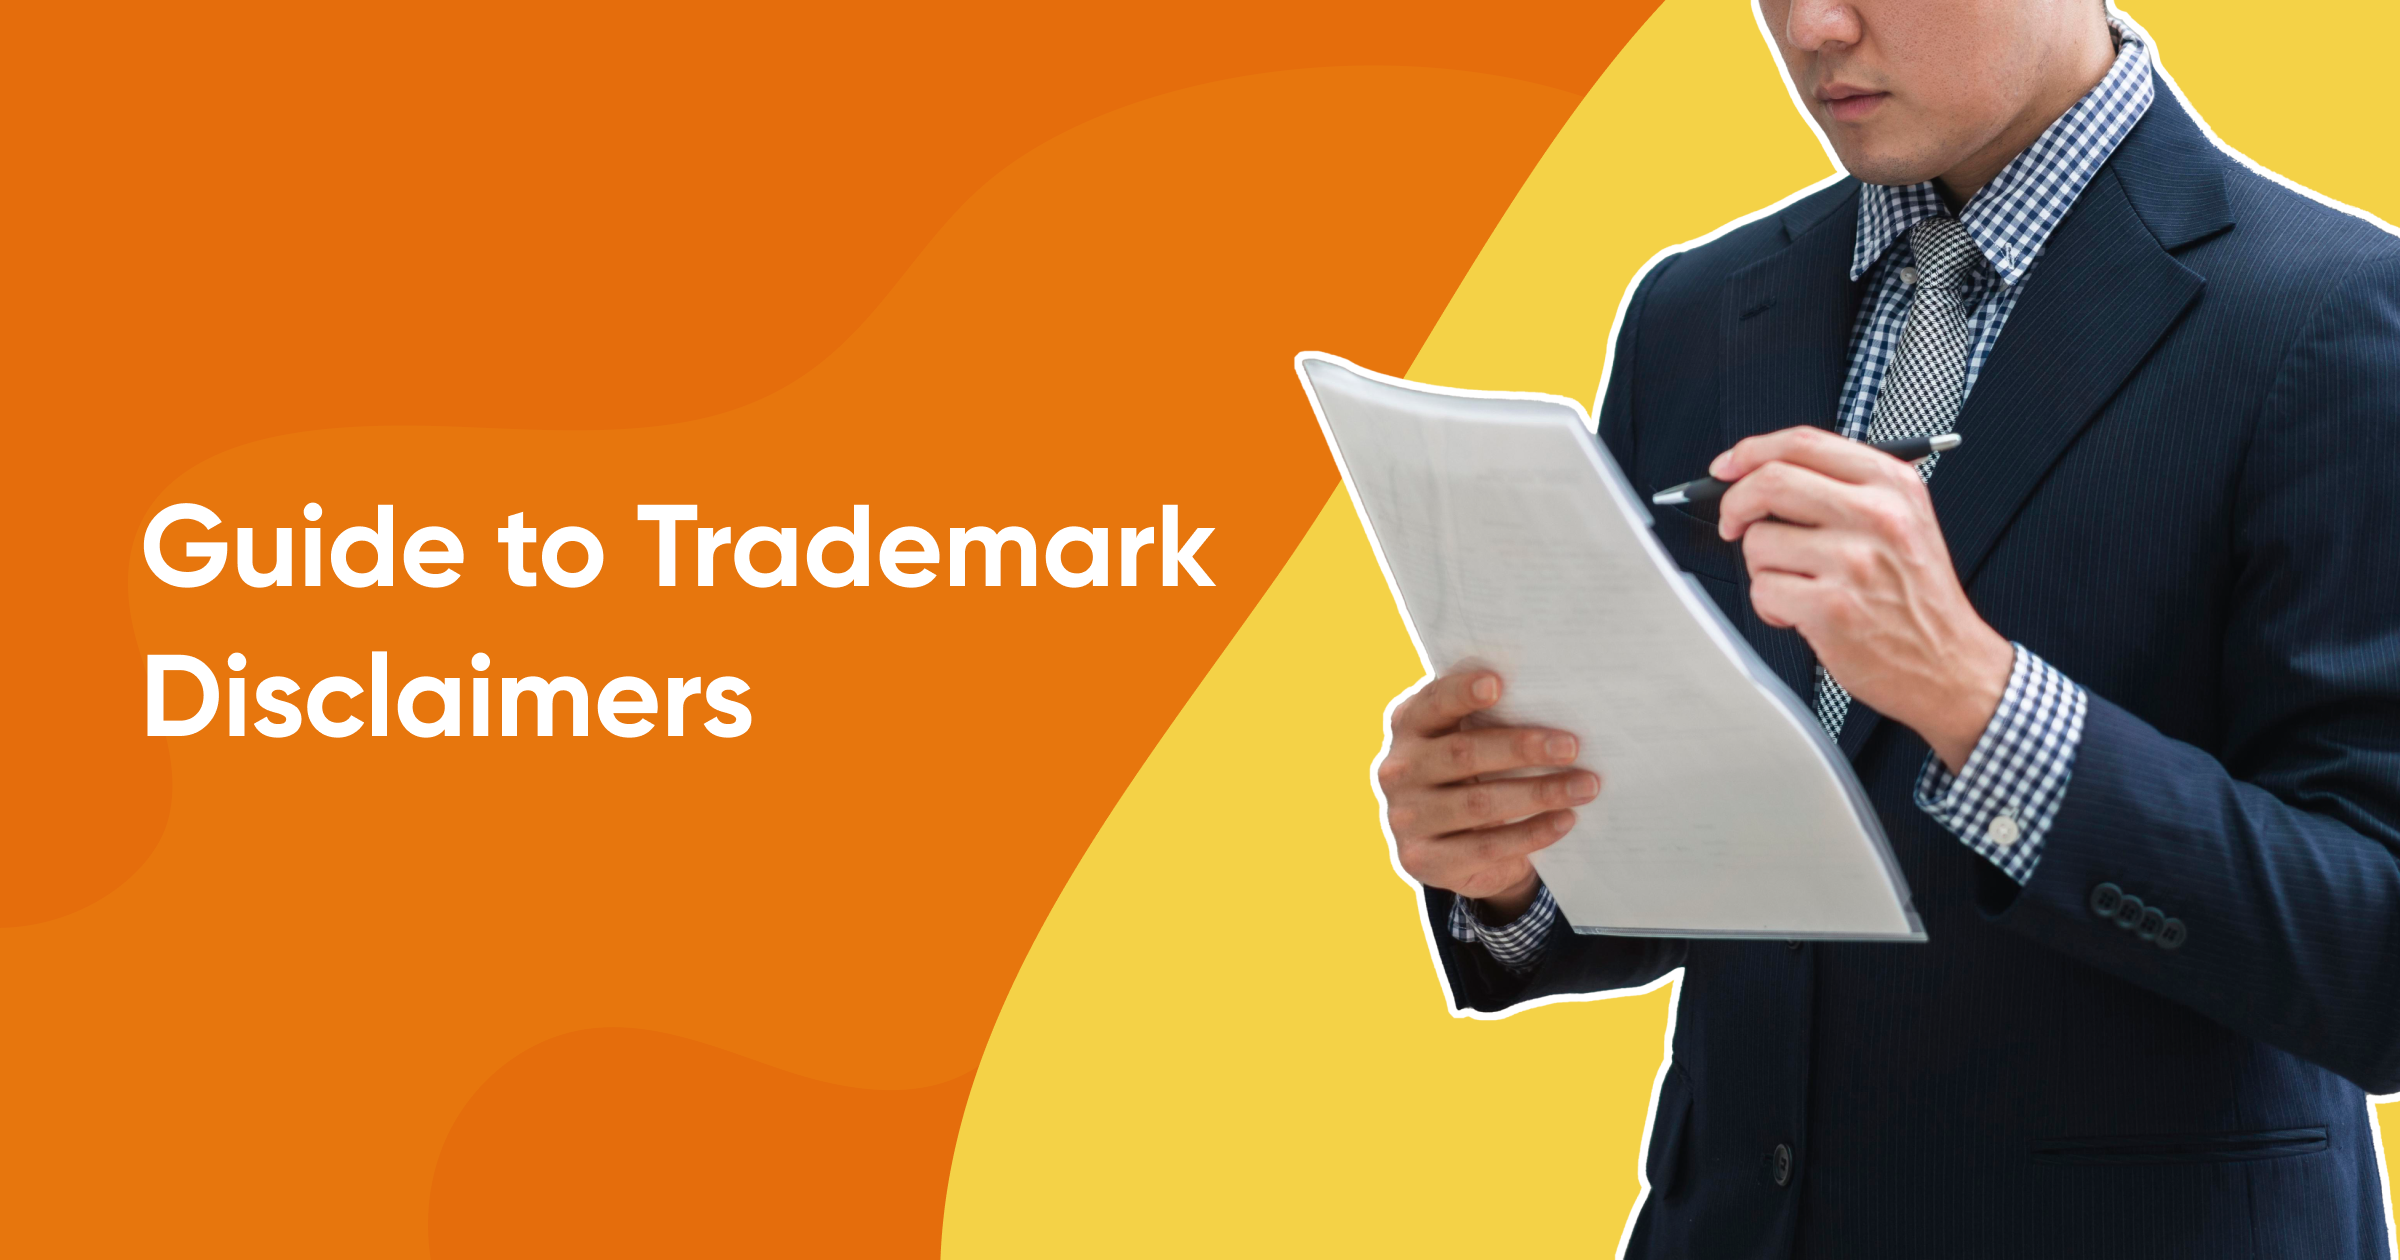 Guide to Trademark Disclaimers
